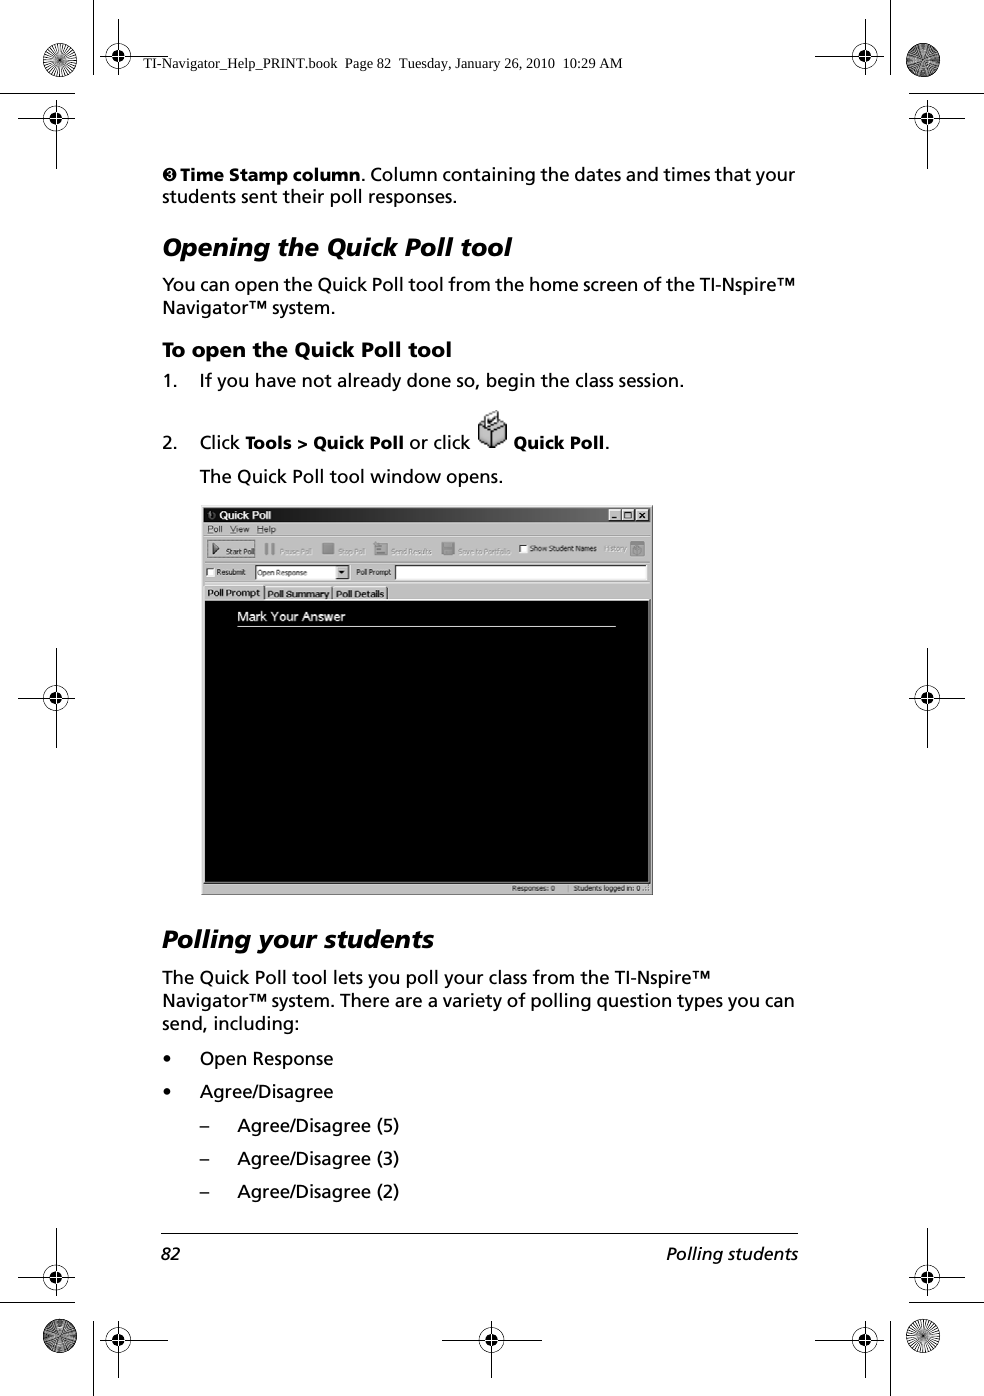 82 Polling studentsÌ Time Stamp column. Column containing the dates and times that your students sent their poll responses.Opening the Quick Poll toolYou can open the Quick Poll tool from the home screen of the TI-Nspire™ Navigator™ system.To open the Quick Poll tool1. If you have not already done so, begin the class session. 2. Click Tools &gt; Quick Poll or click   Quick Poll.The Quick Poll tool window opens.Polling your studentsThe Quick Poll tool lets you poll your class from the TI-Nspire™ Navigator™ system. There are a variety of polling question types you can send, including:• Open Response• Agree/Disagree – Agree/Disagree (5)– Agree/Disagree (3)– Agree/Disagree (2)TI-Navigator_Help_PRINT.book  Page 82  Tuesday, January 26, 2010  10:29 AM